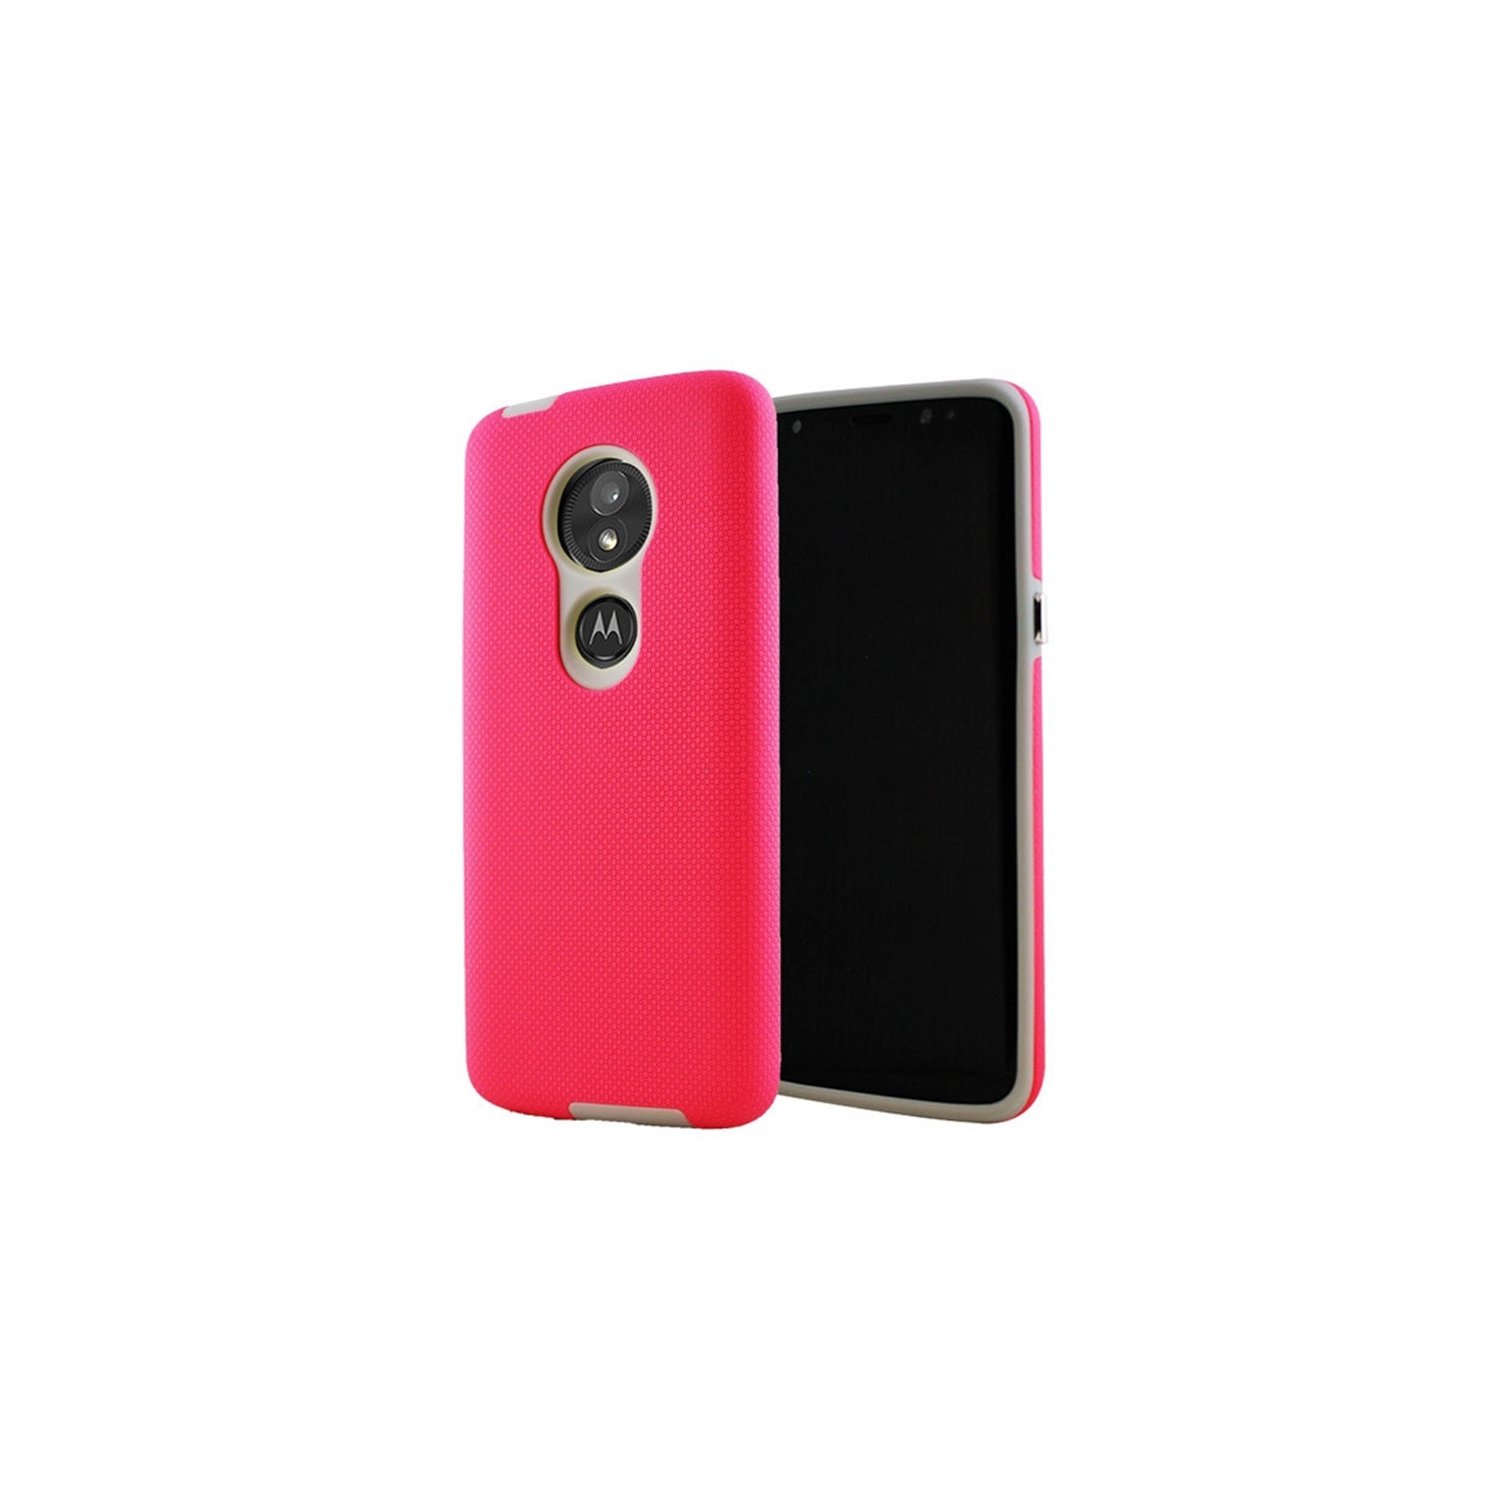 【CSmart】 Slim Fitted Hybrid Hard PC Shell Shockproof Scratch Resistant Case Cover for Motorola Moto G7 Play, Hot Pink